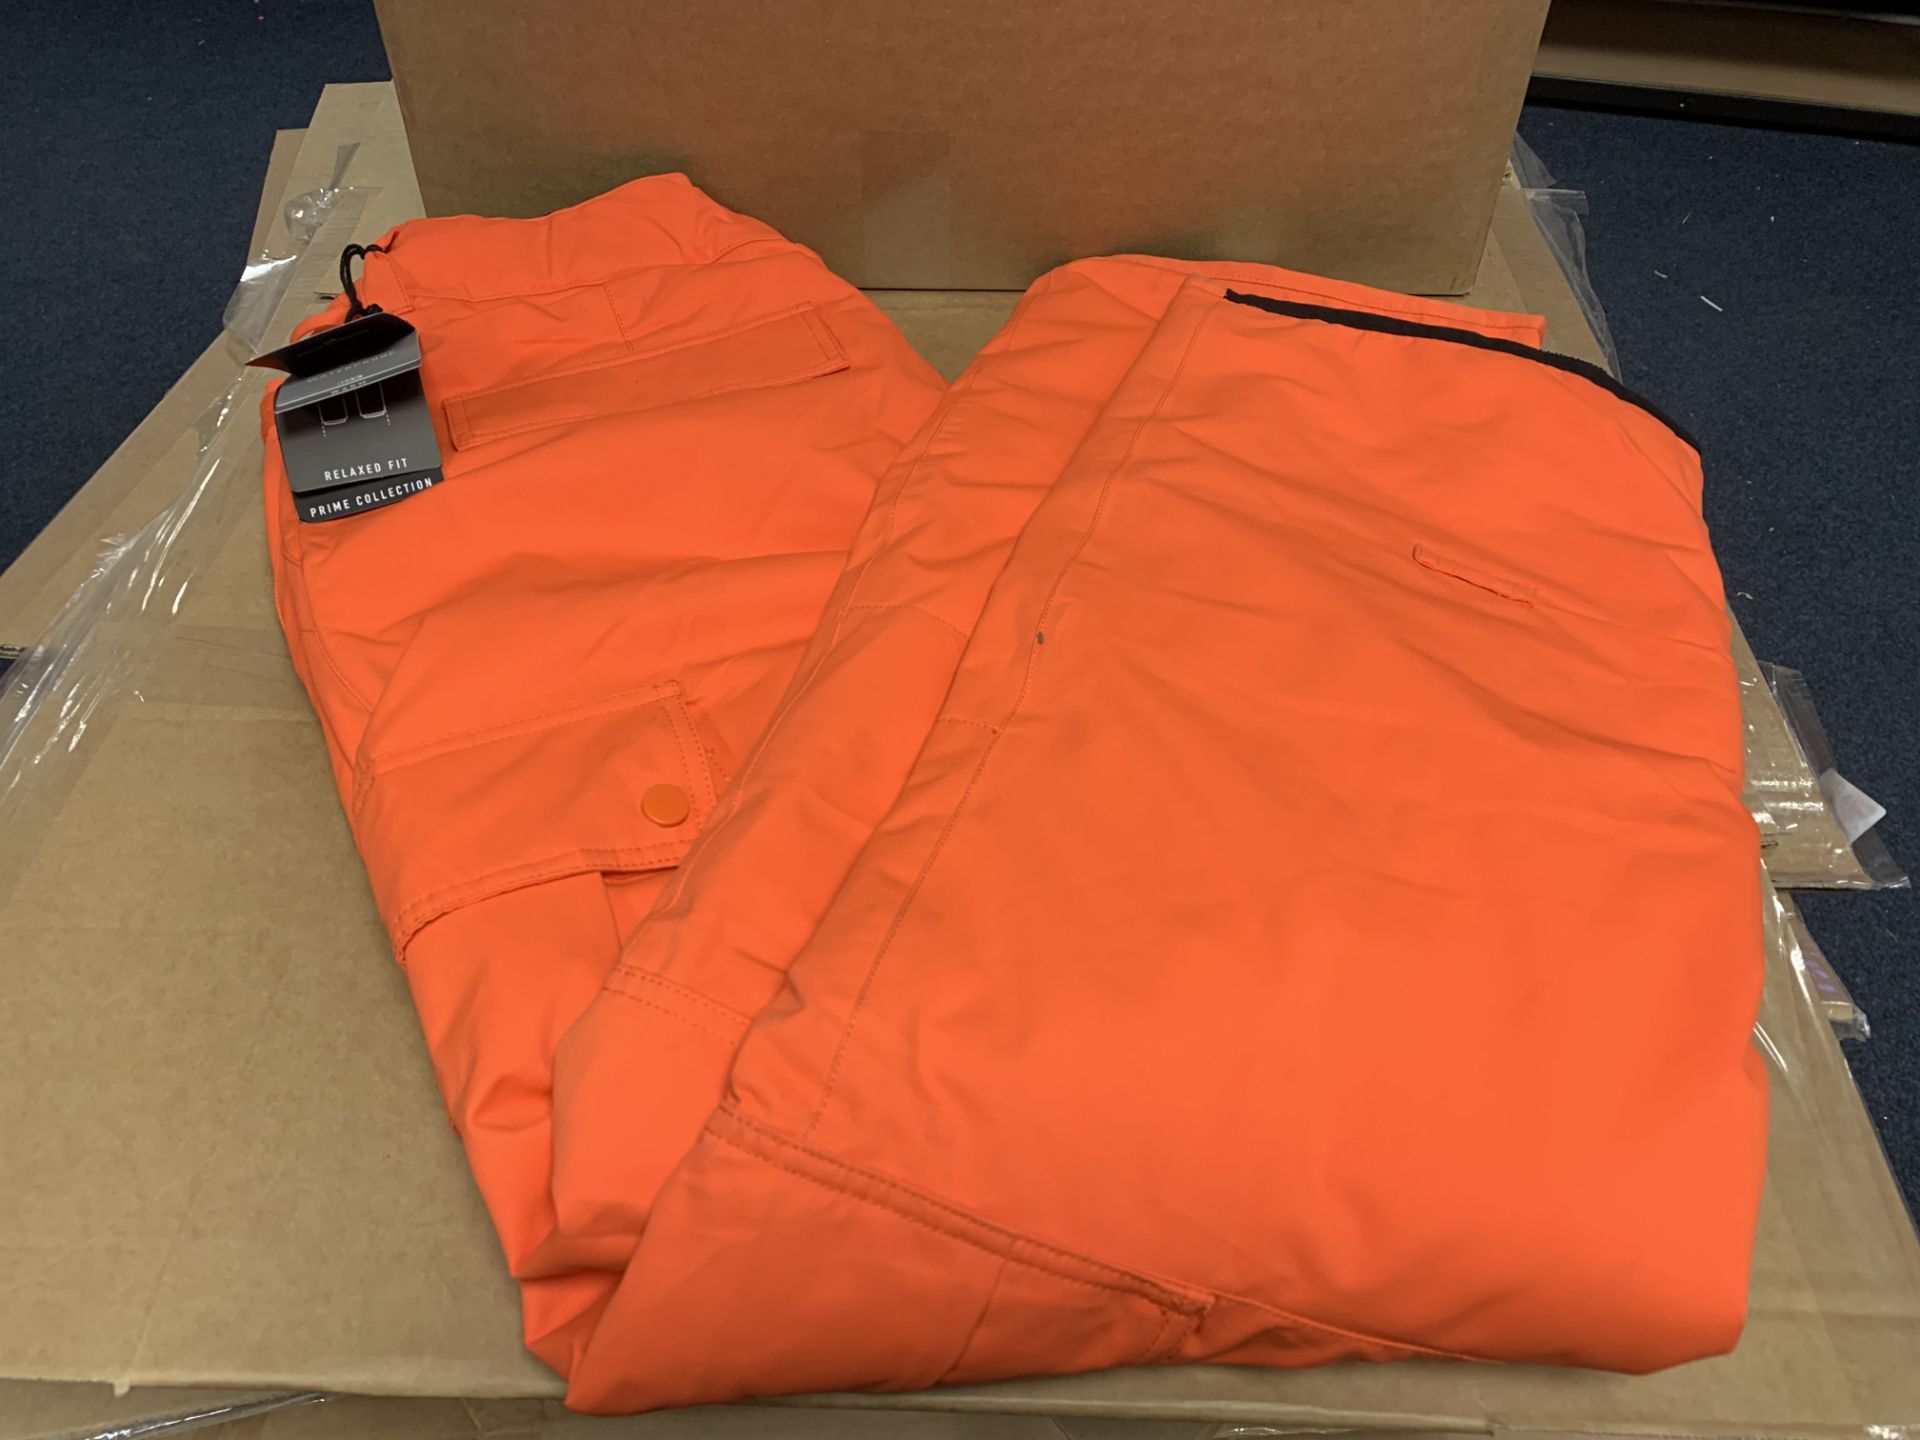 3 X BRAND NEW BILLABONG TRANSPORT PUFFIN ORANGE SKI TROUSERS IN VARIOUS SIZES RRP £135 EACH